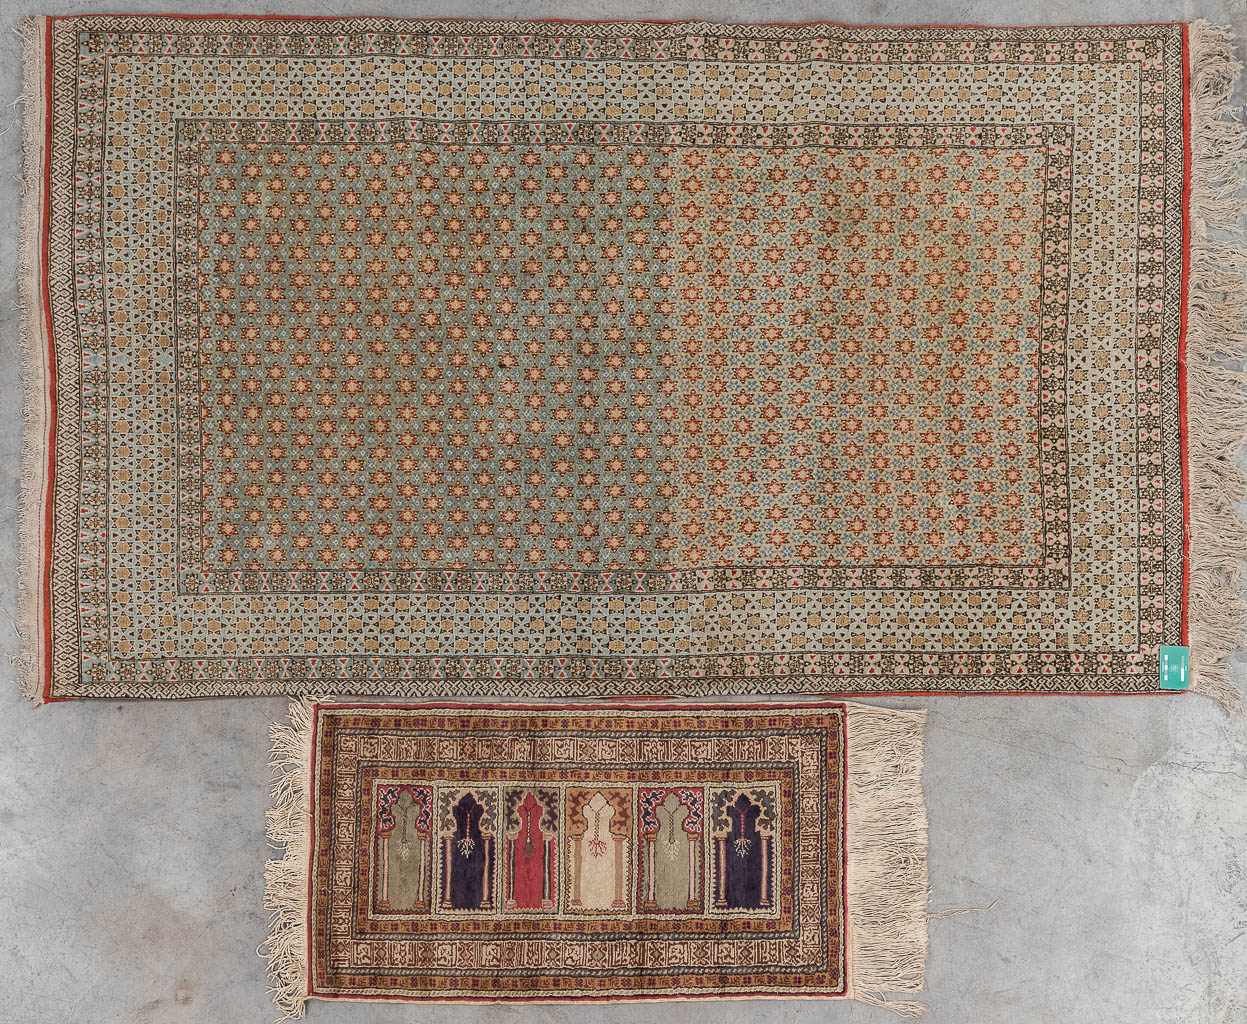 A collection of 2 Oriental hand-made carpets. Persia. (L: 220 x W: 134 cm)